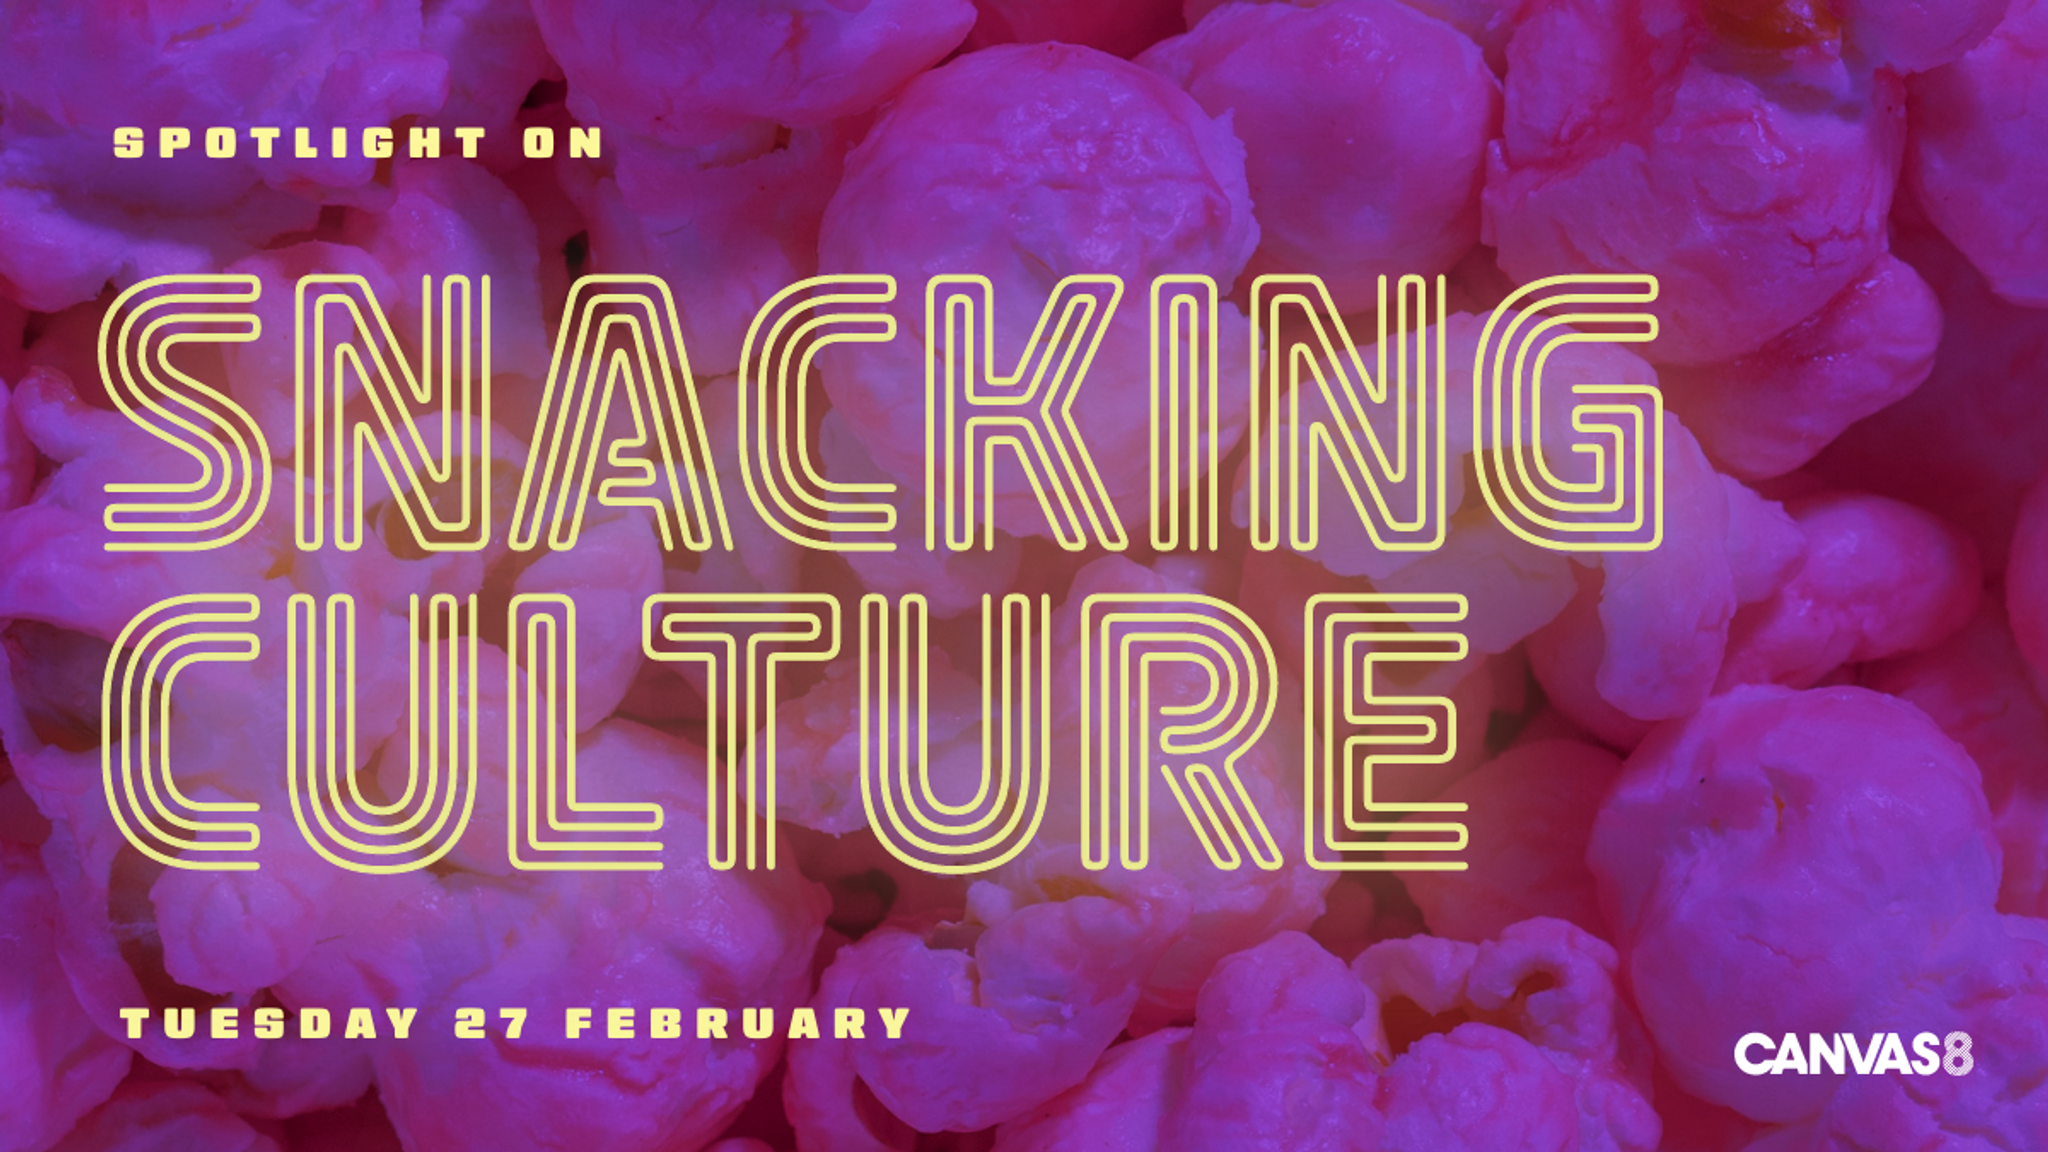 Spotlight on snacking culture